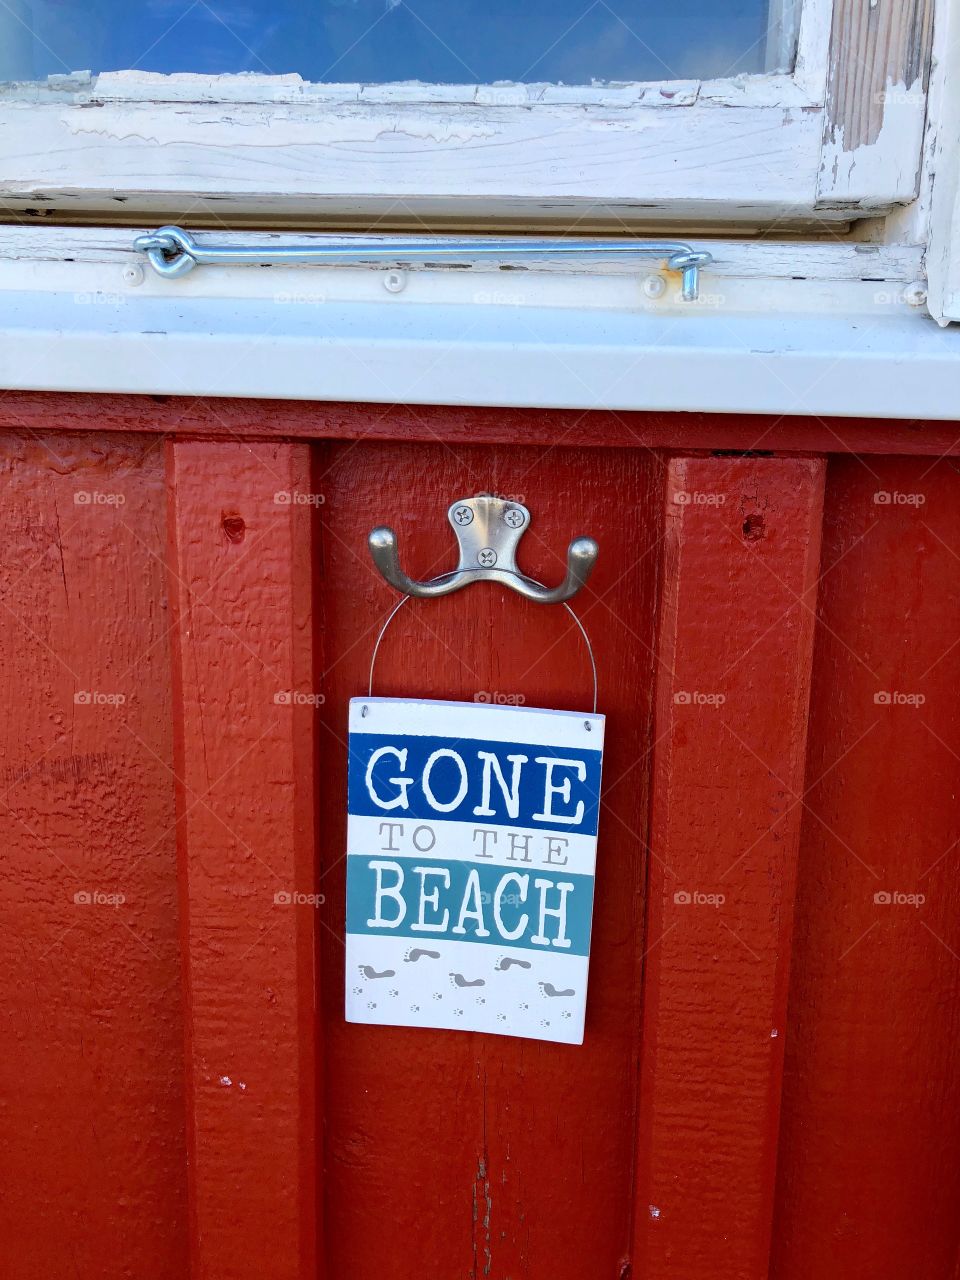 Gone to the beach / Sign